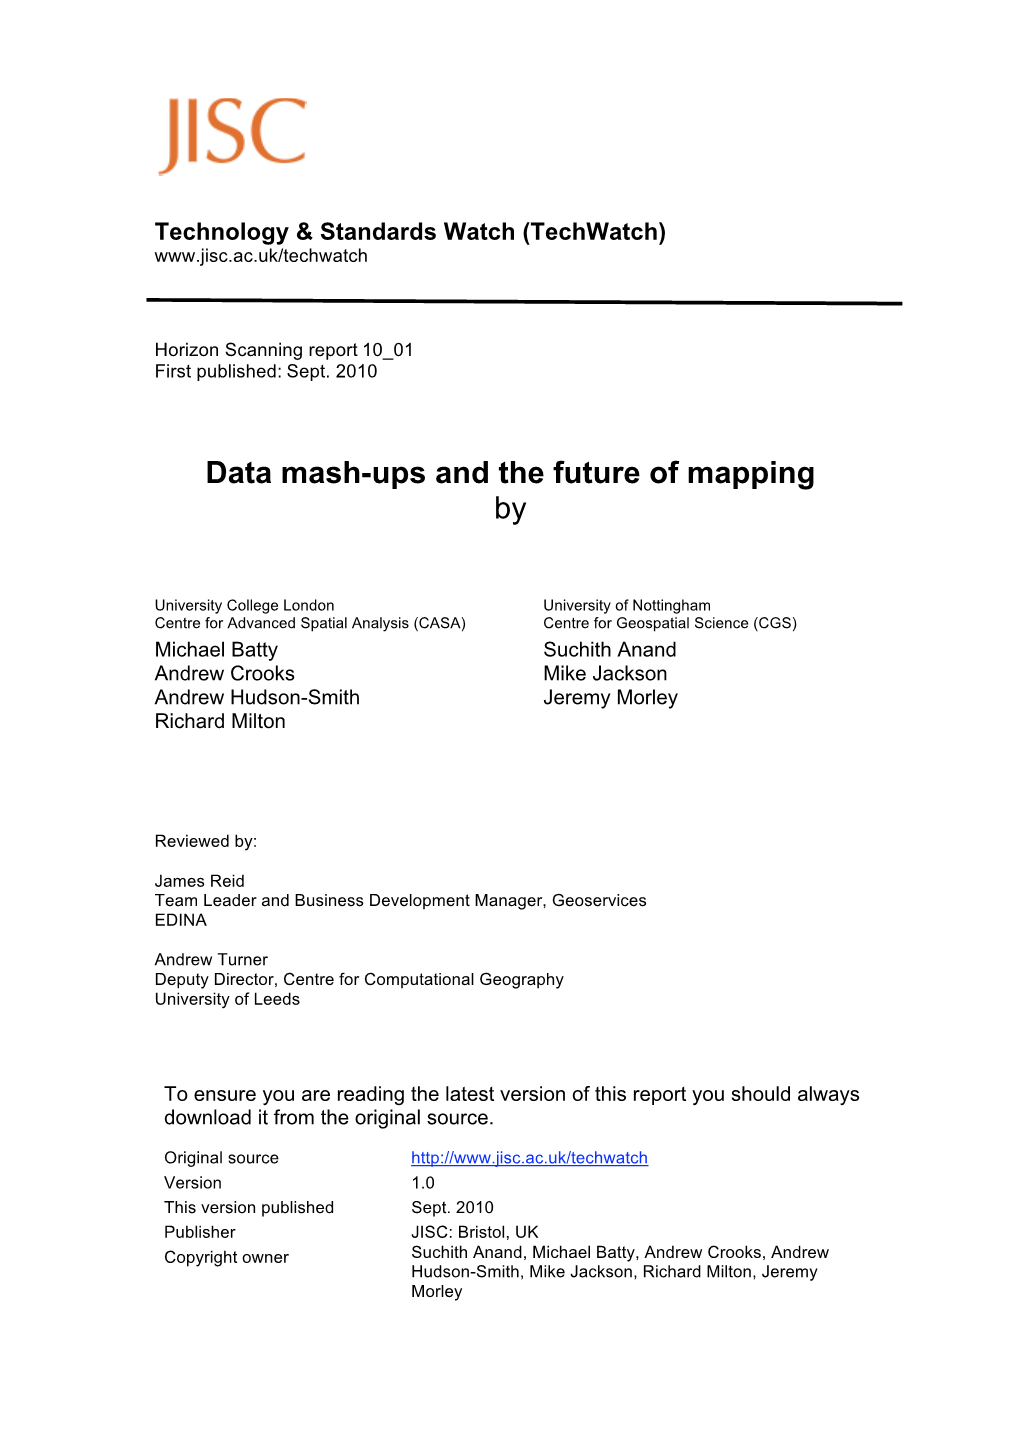 Data Mash-Ups and the Future of Mapping By